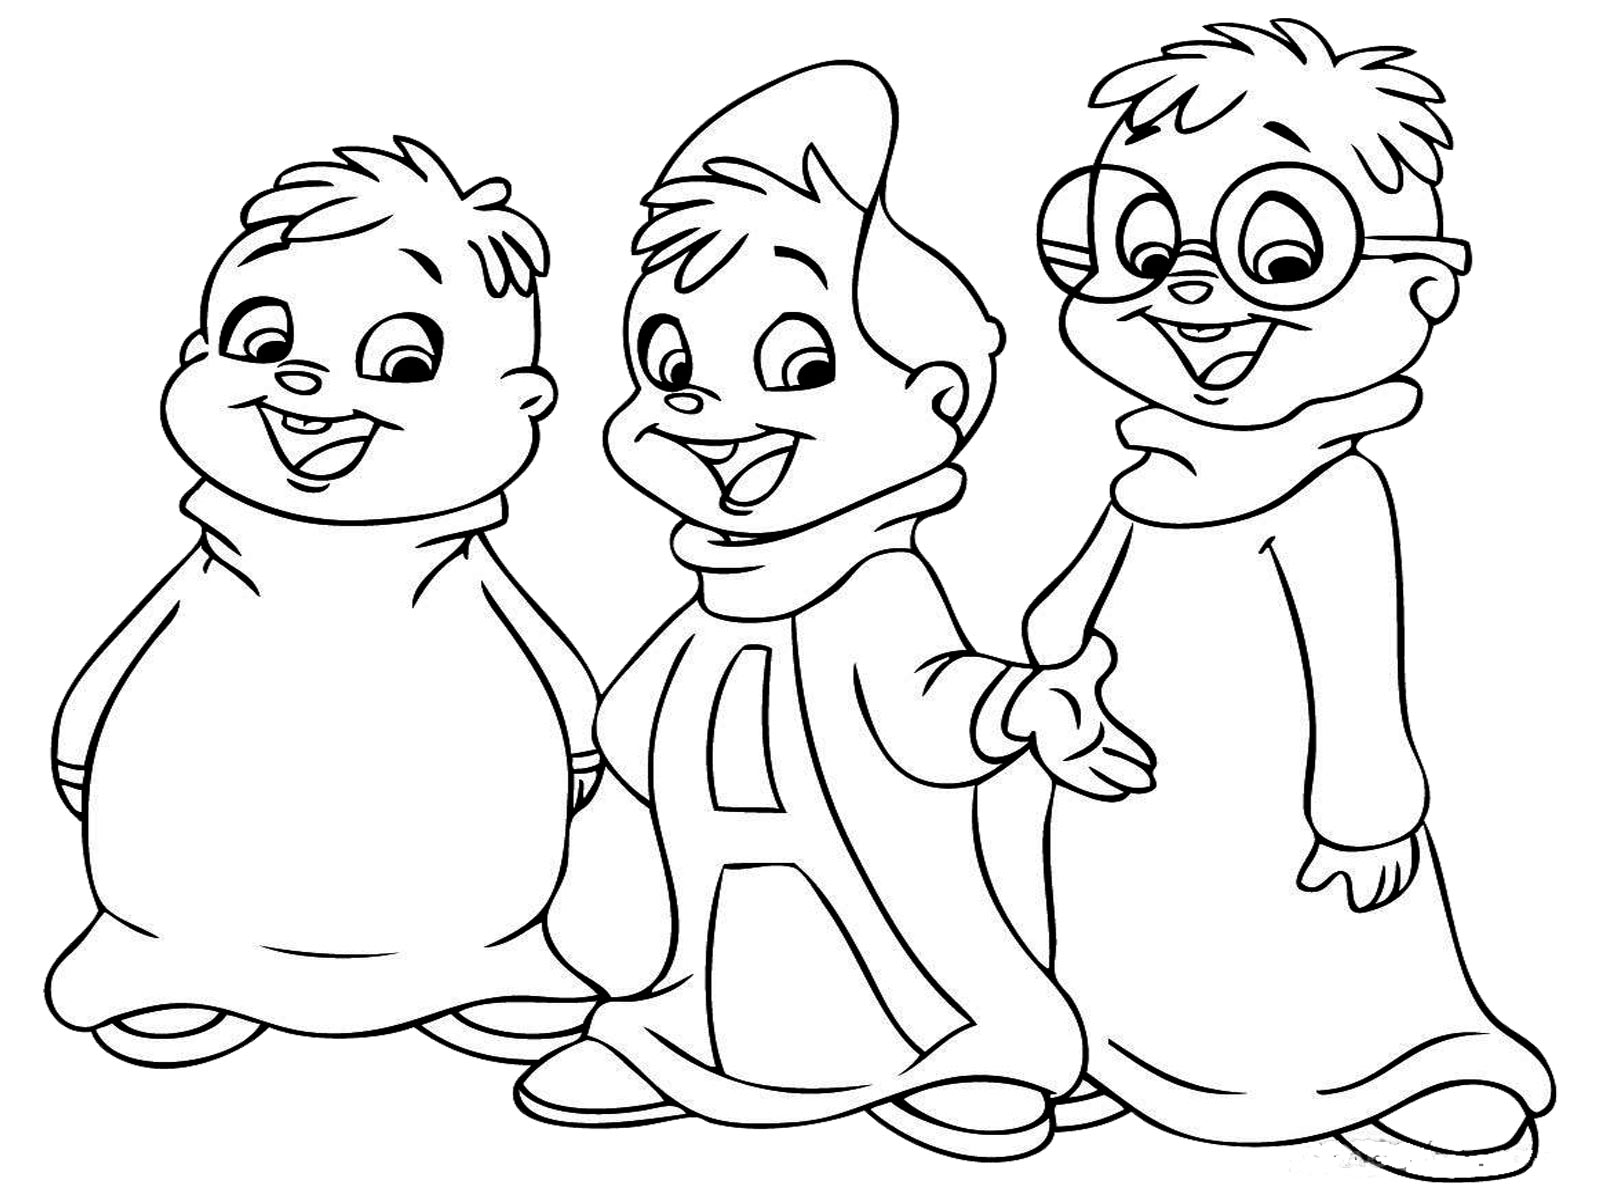 Alvin And The Chipmunks Coloring Pages | Realistic ...